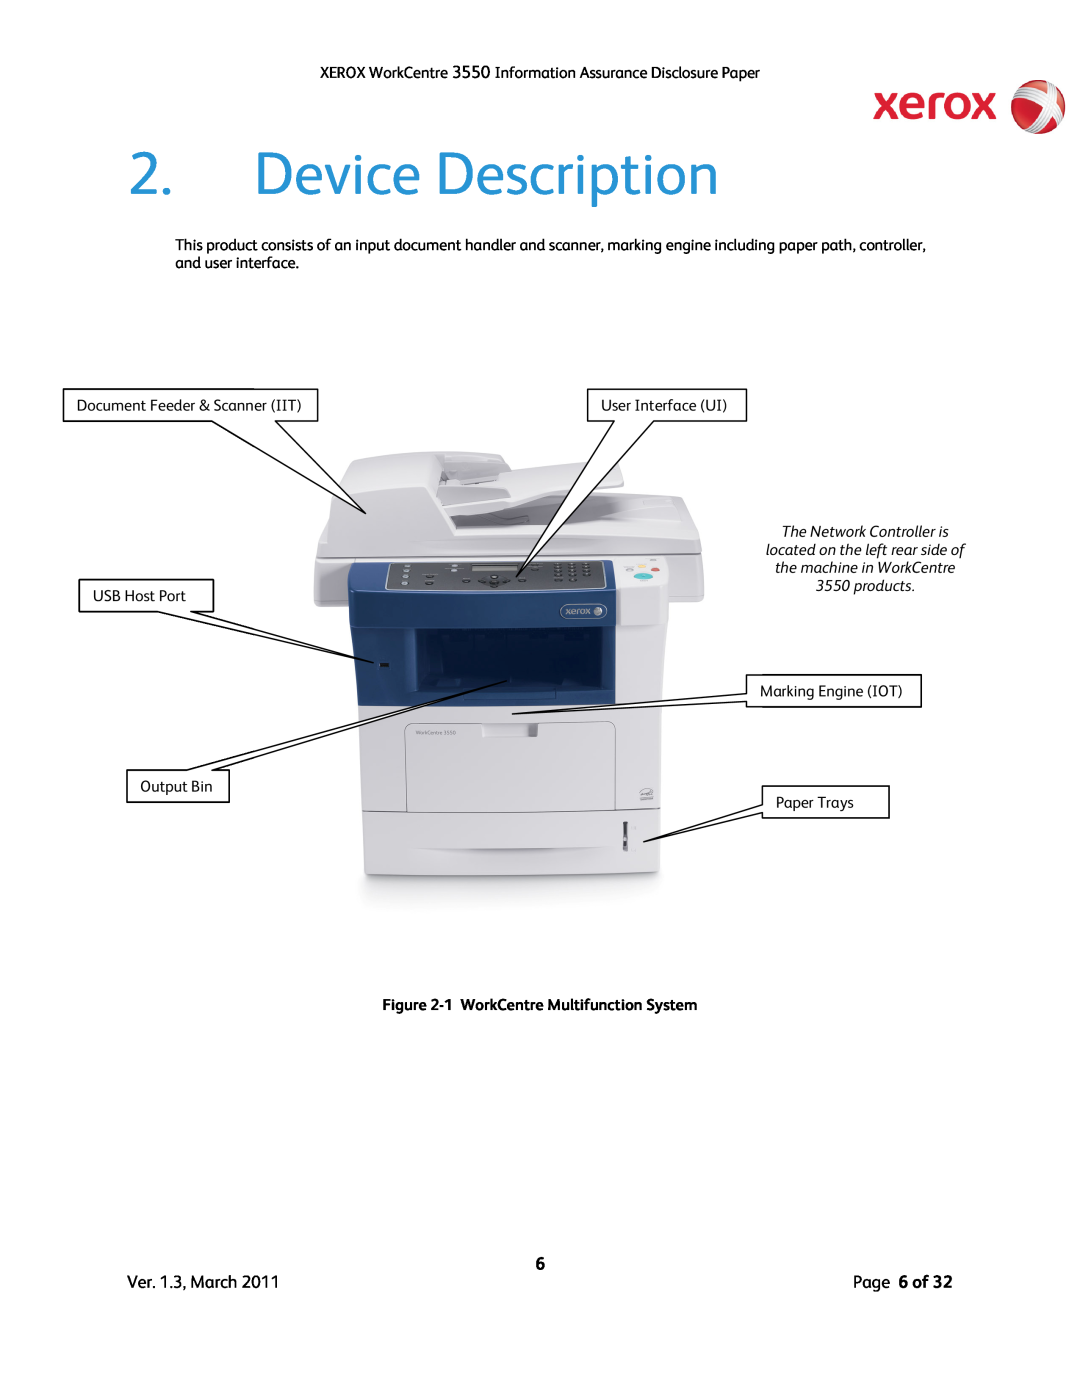 Xerox 3550 Device Description, The Network Controller is, located on the left rear side of, the machine in WorkCentre 